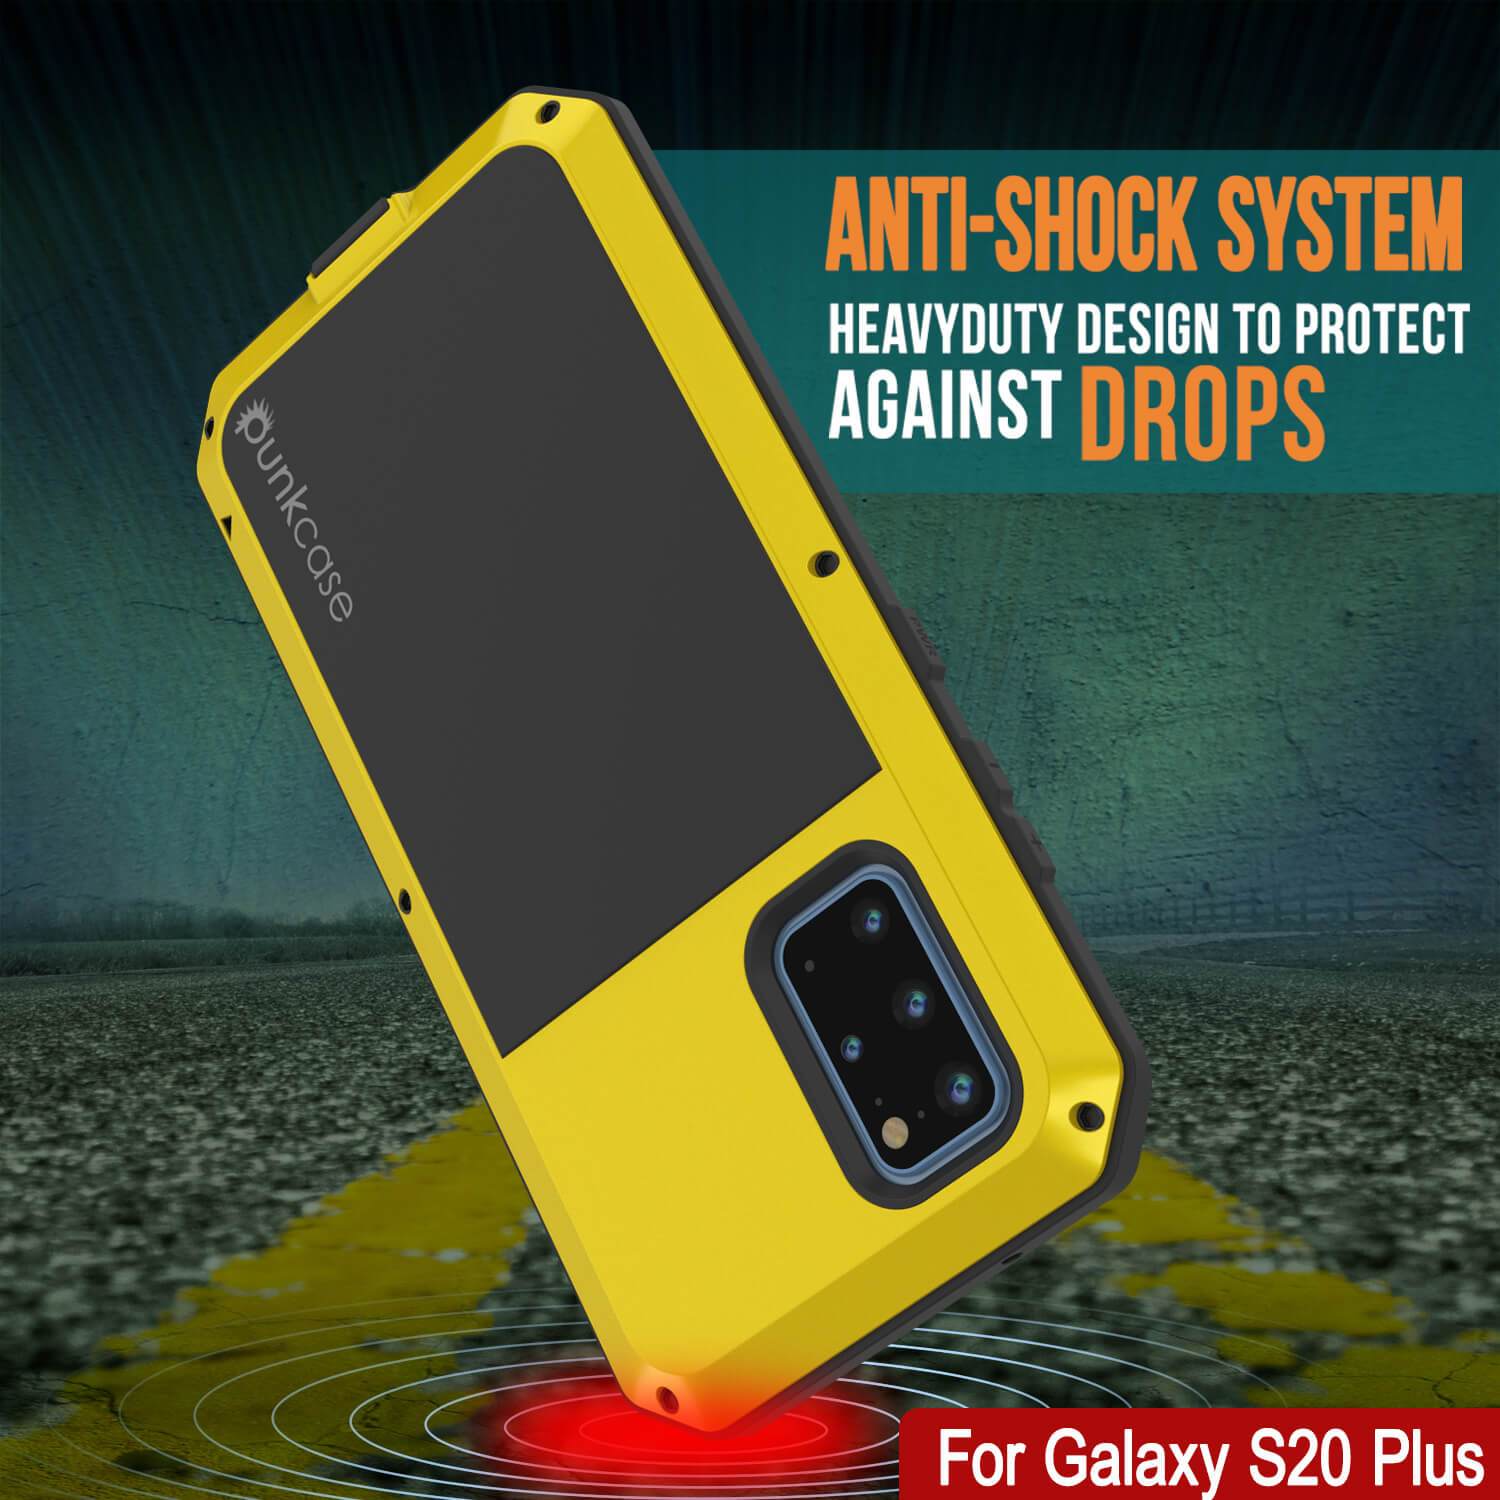 Galaxy s20+ Plus Metal Case, Heavy Duty Military Grade Rugged Armor Cover [Neon]